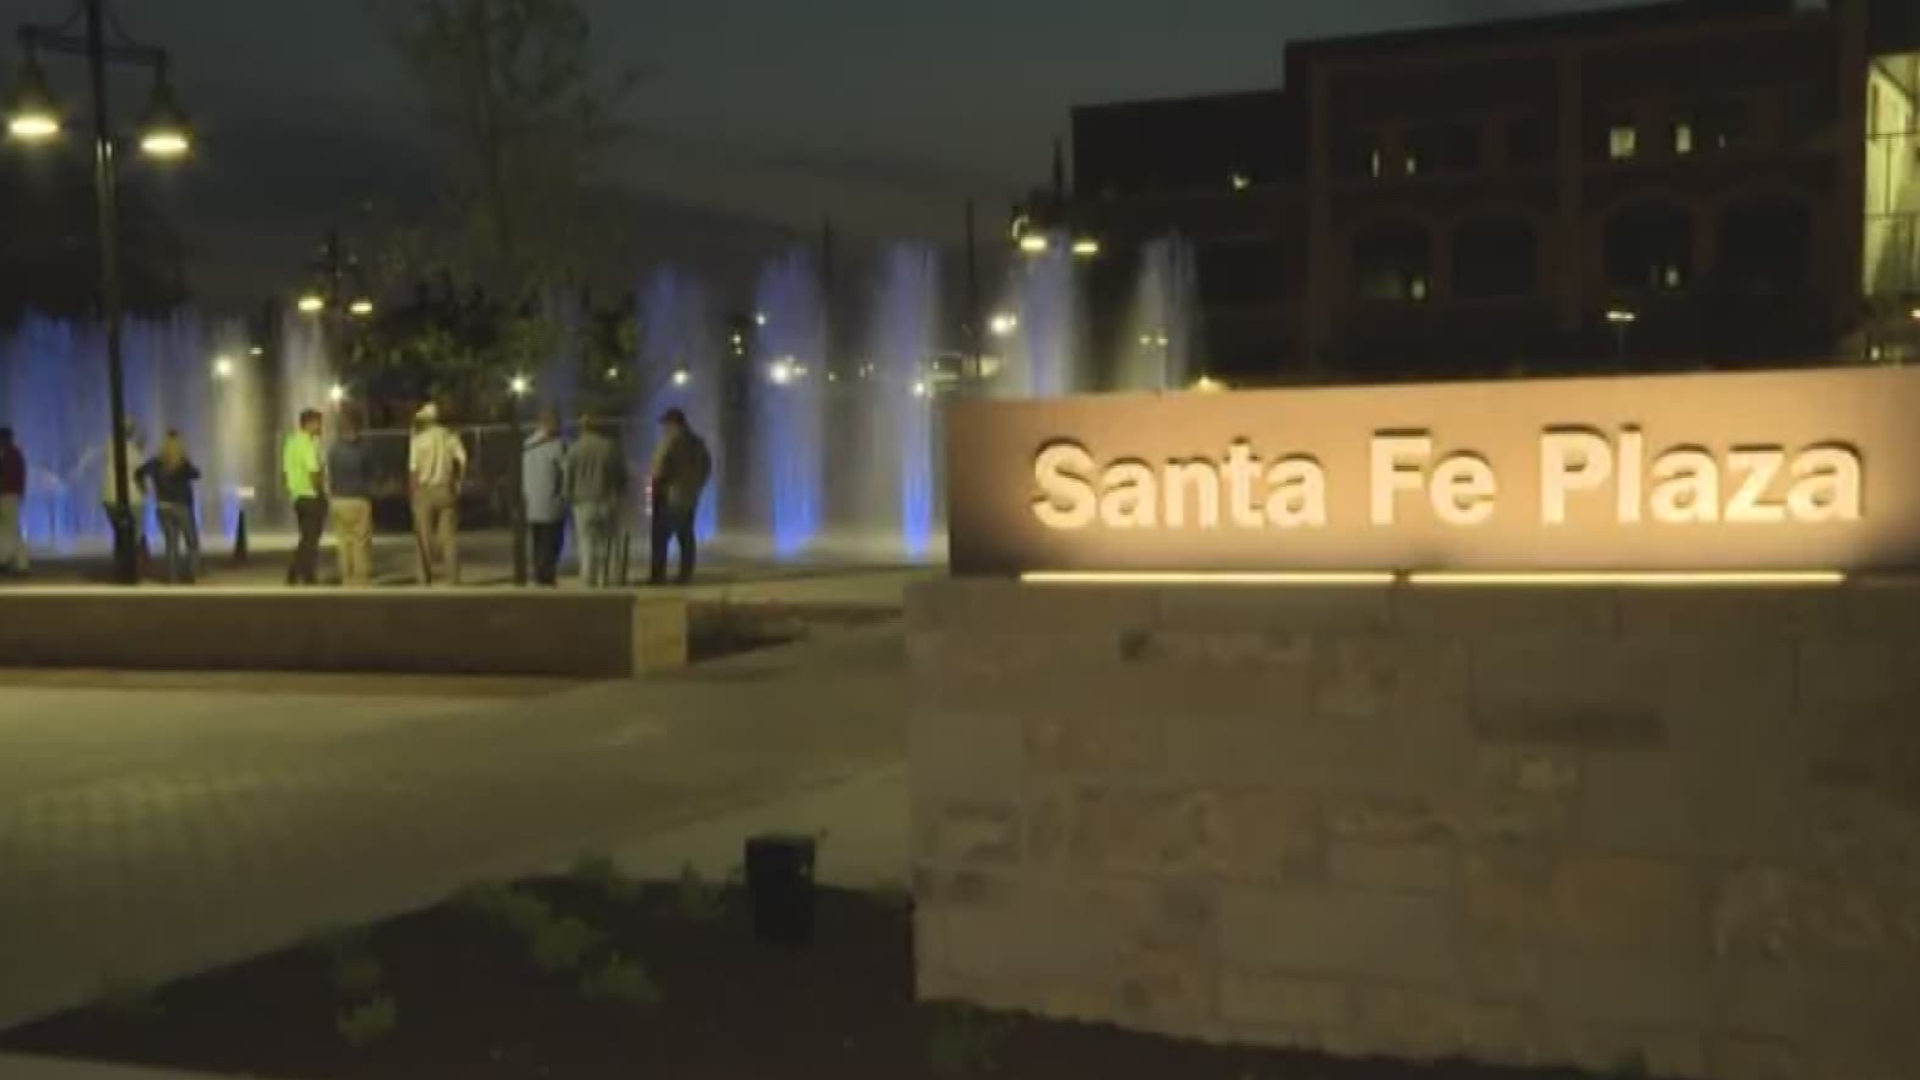 Central Texans have a chance to enjoy some music, art and food at Temple's new downtown Santa Fe Plaza Saturday.